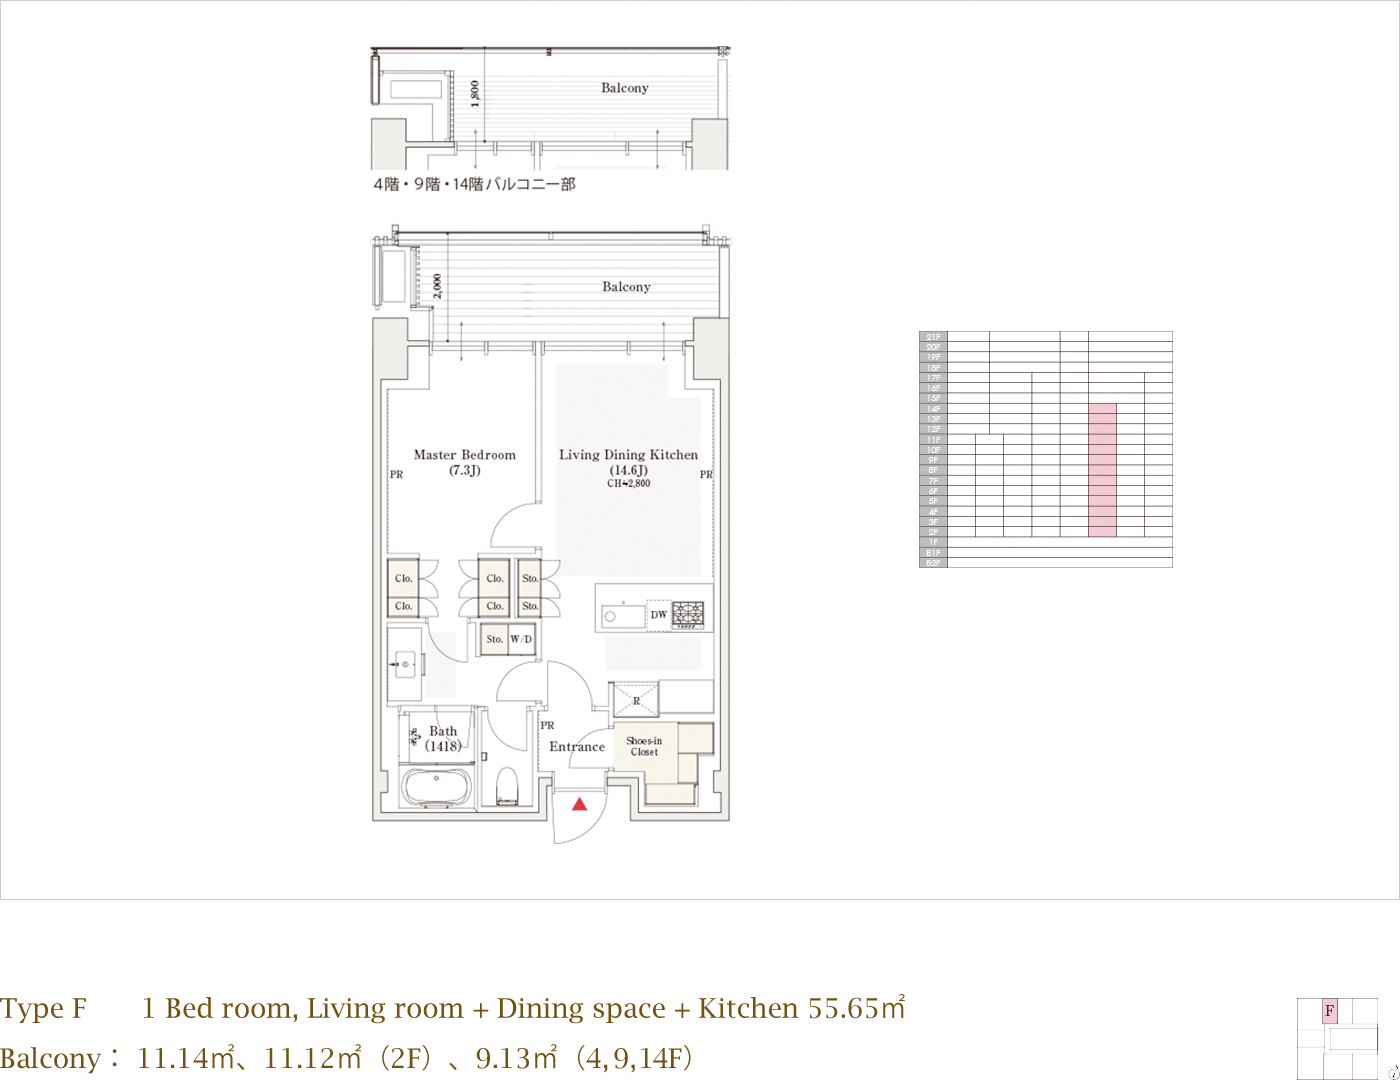 Type F 1 Bed room, Living room + Dining space + Kitchen 55.65m² Balcony 11.14m²,11.12m²(2F),9.13m²(4F,9F,14F)